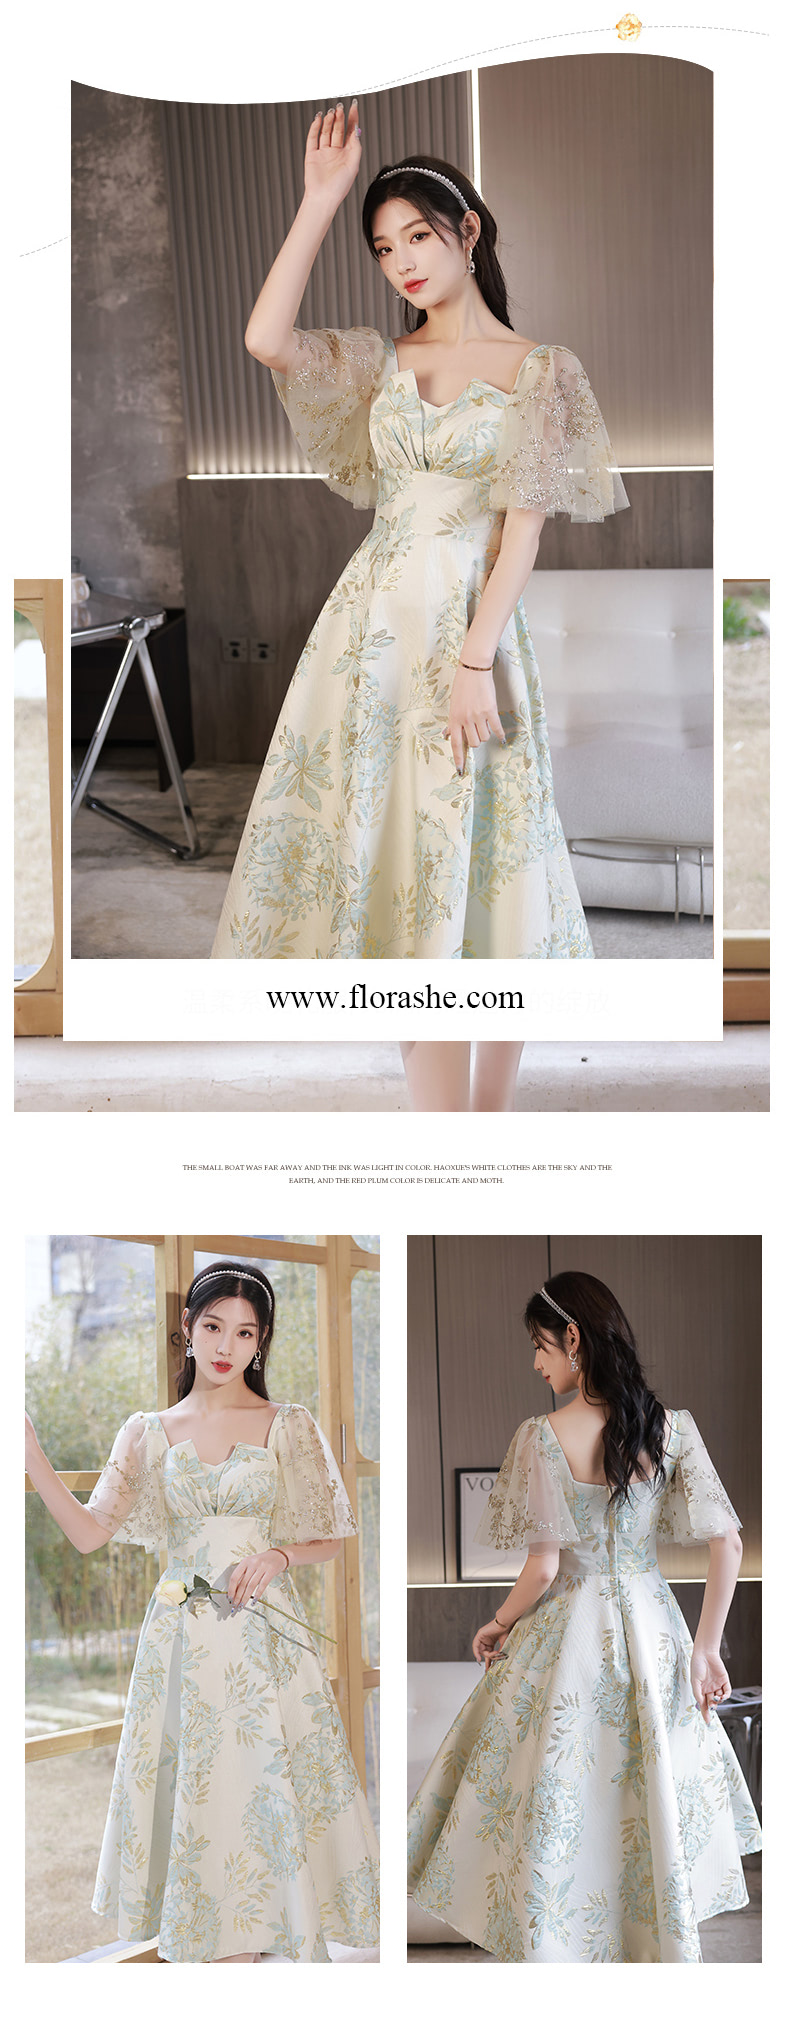 A-Line-Boutique-Floral-Printed-Midi-Prom-Dress-with-Short-Sleeves08.jpg